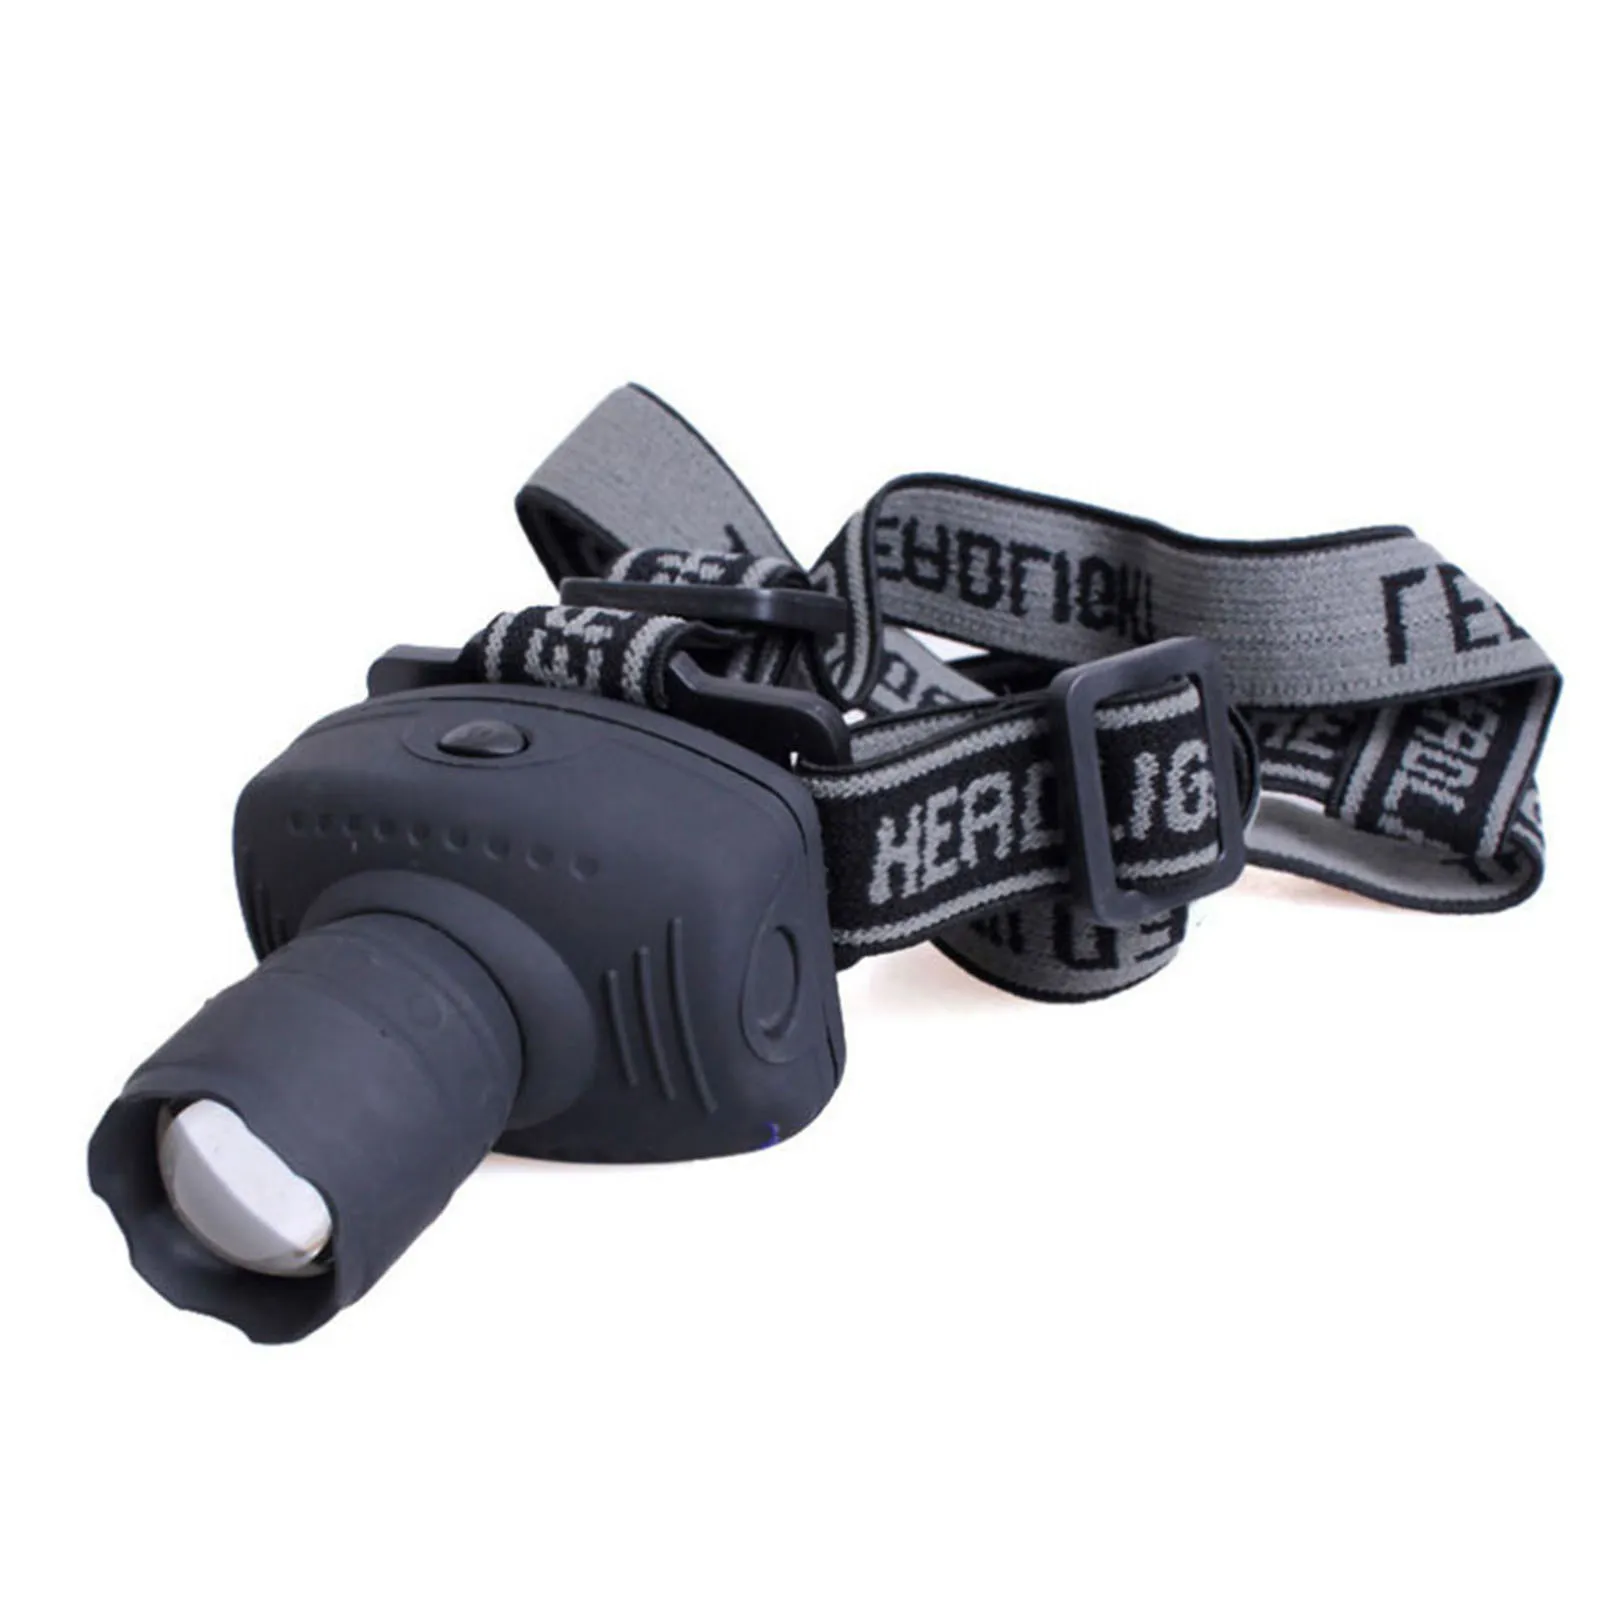 

3W LED Outdoor Camping Headlamp Frontal Lantern Zoomable Head Torch Light for Camping Hiking Fishing SCIE999